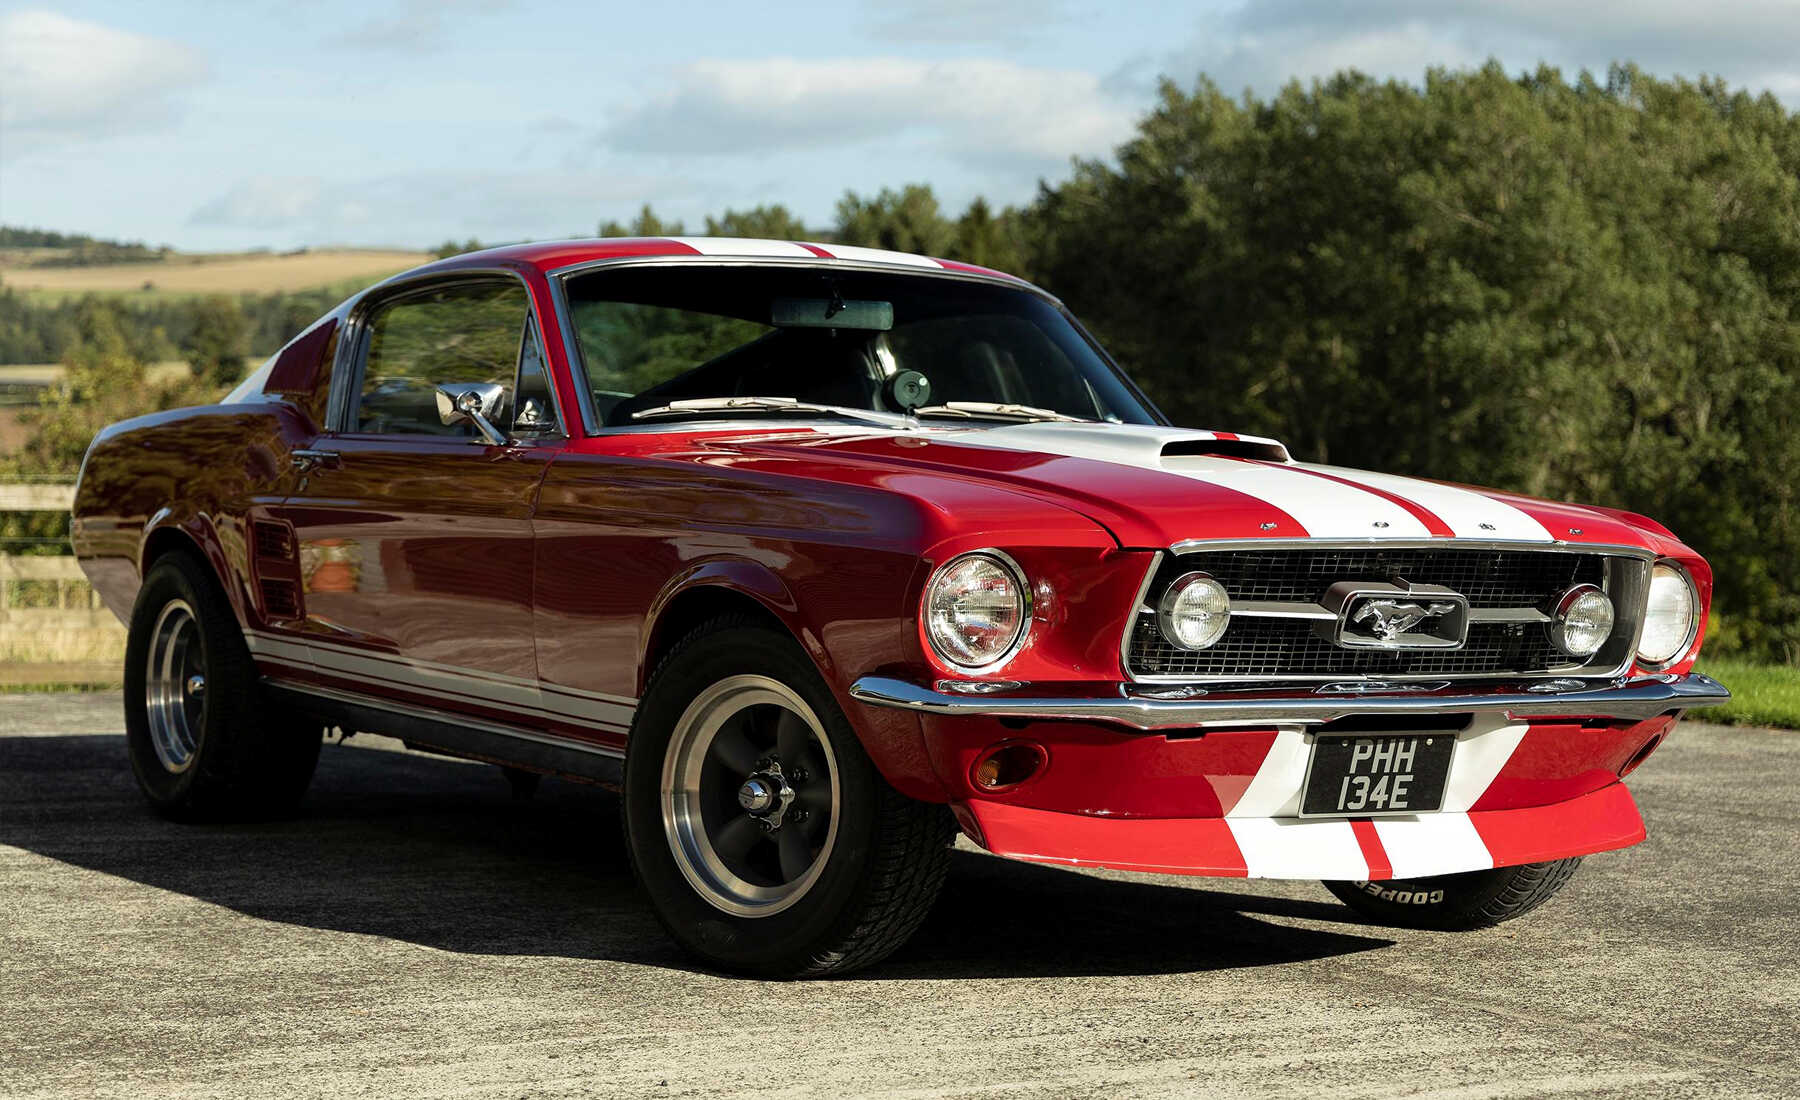 These Are The Most Sought-After Classic Cars In Europe